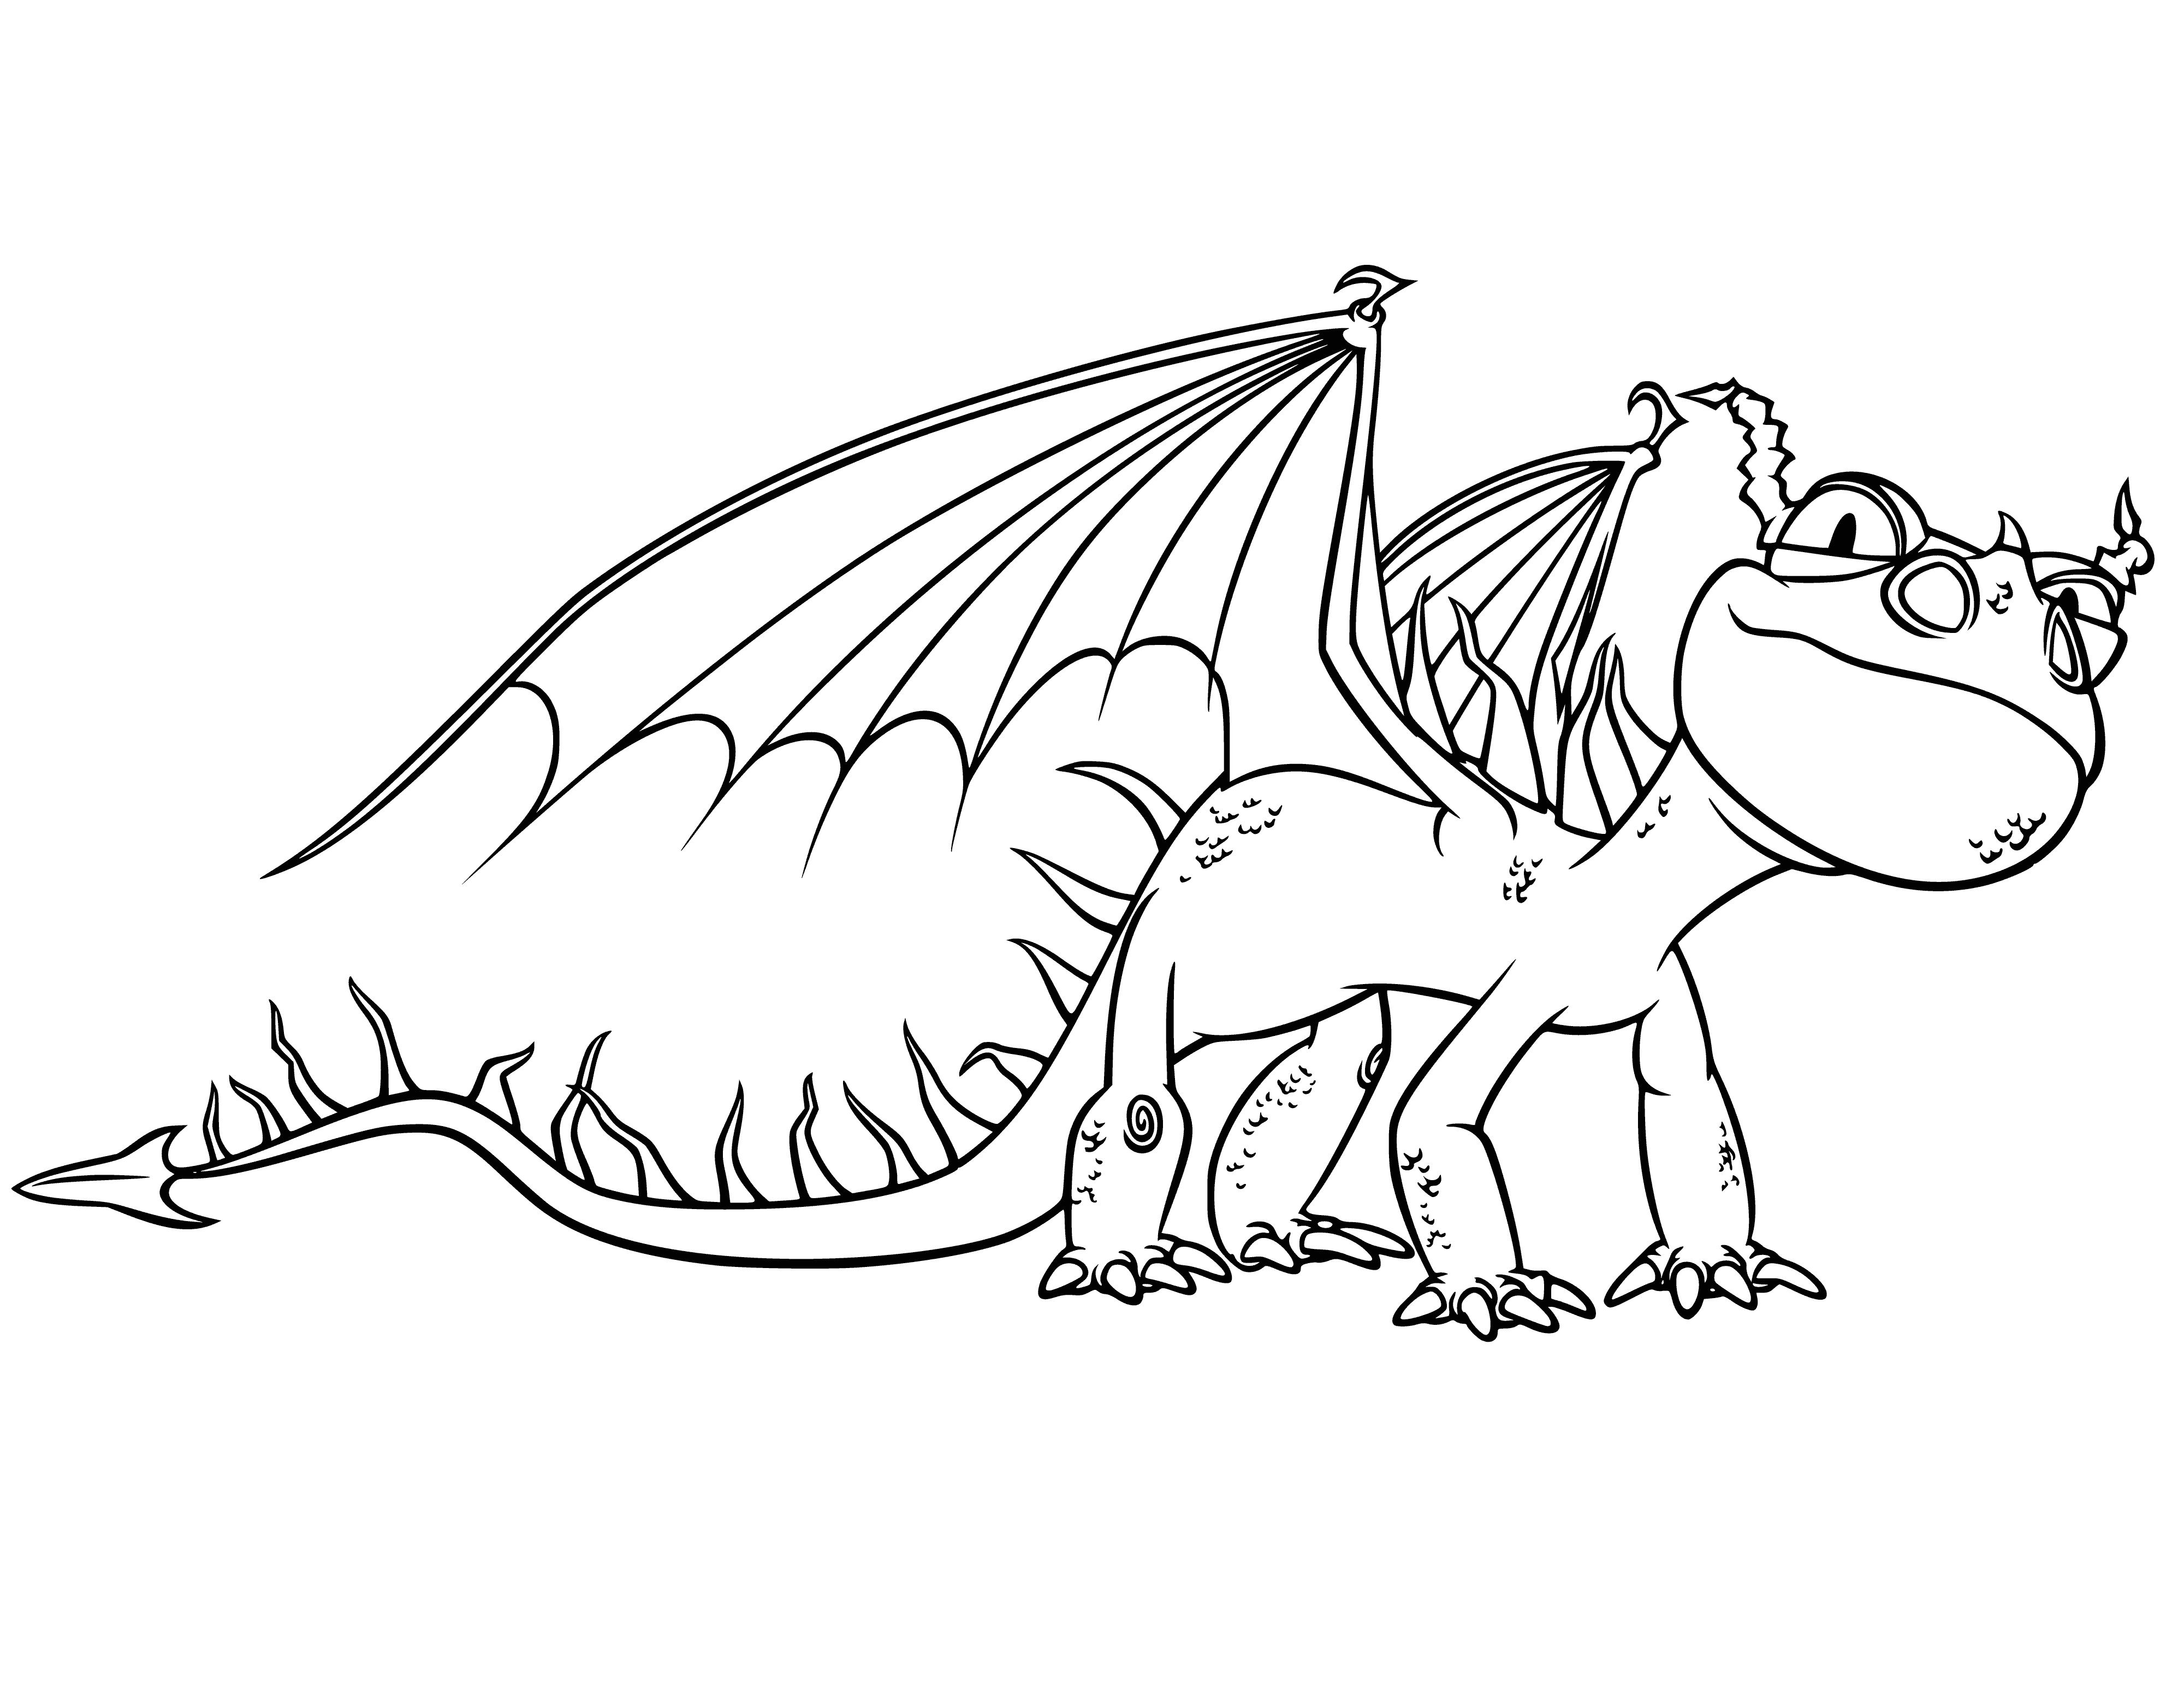 coloring page: Man faces dragon in cave with fire; danger & excitement in the air!